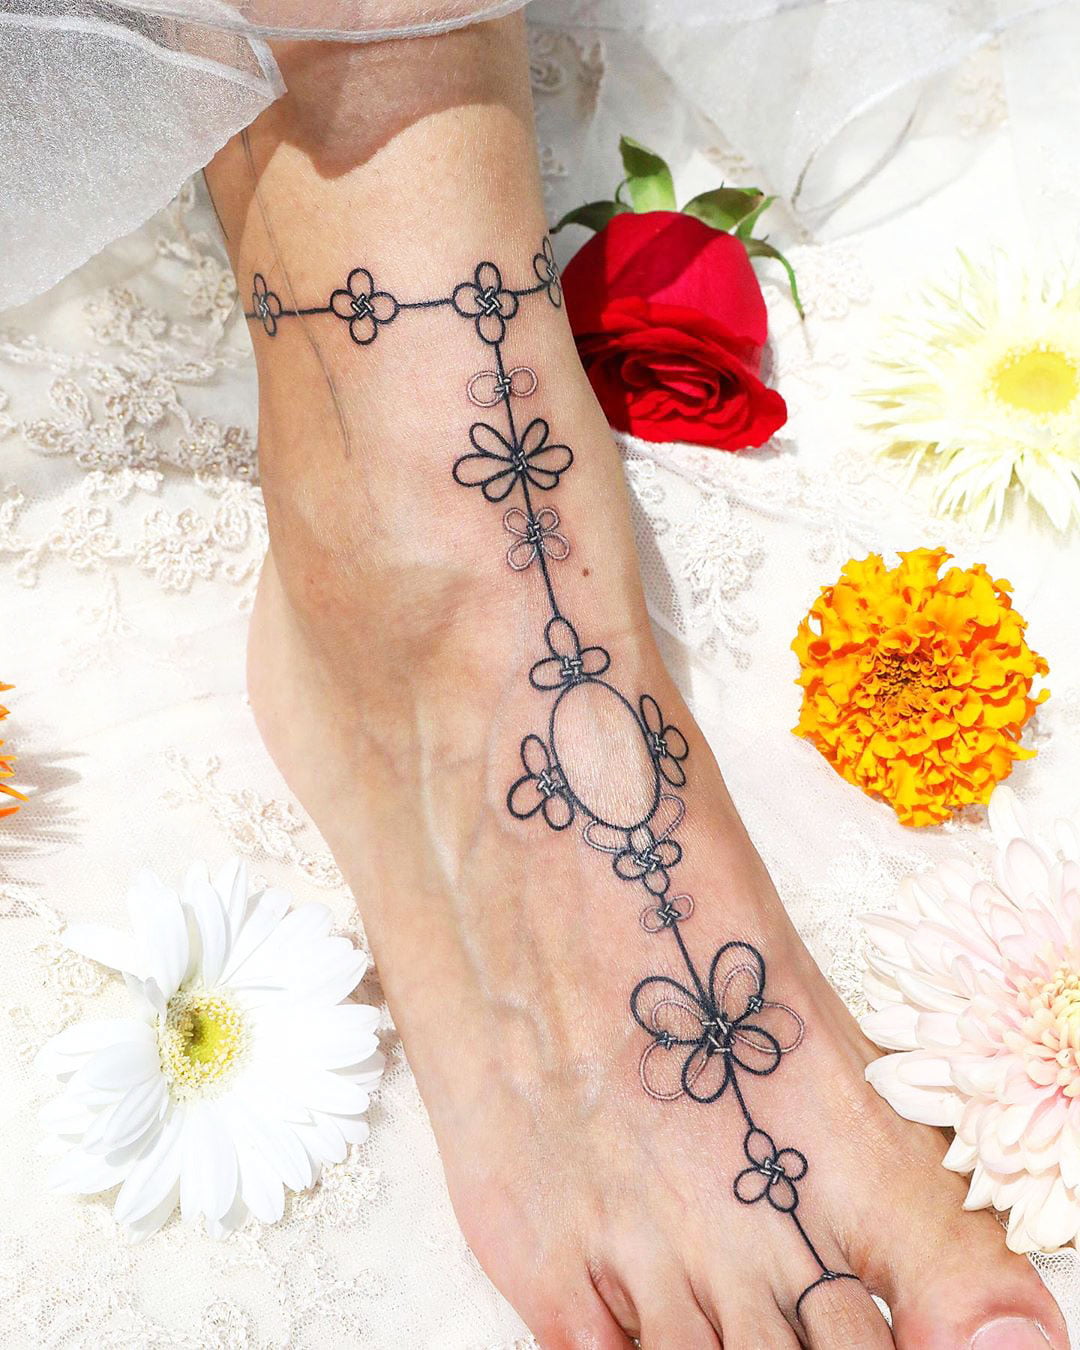 Meaningful Ankle Tattoos